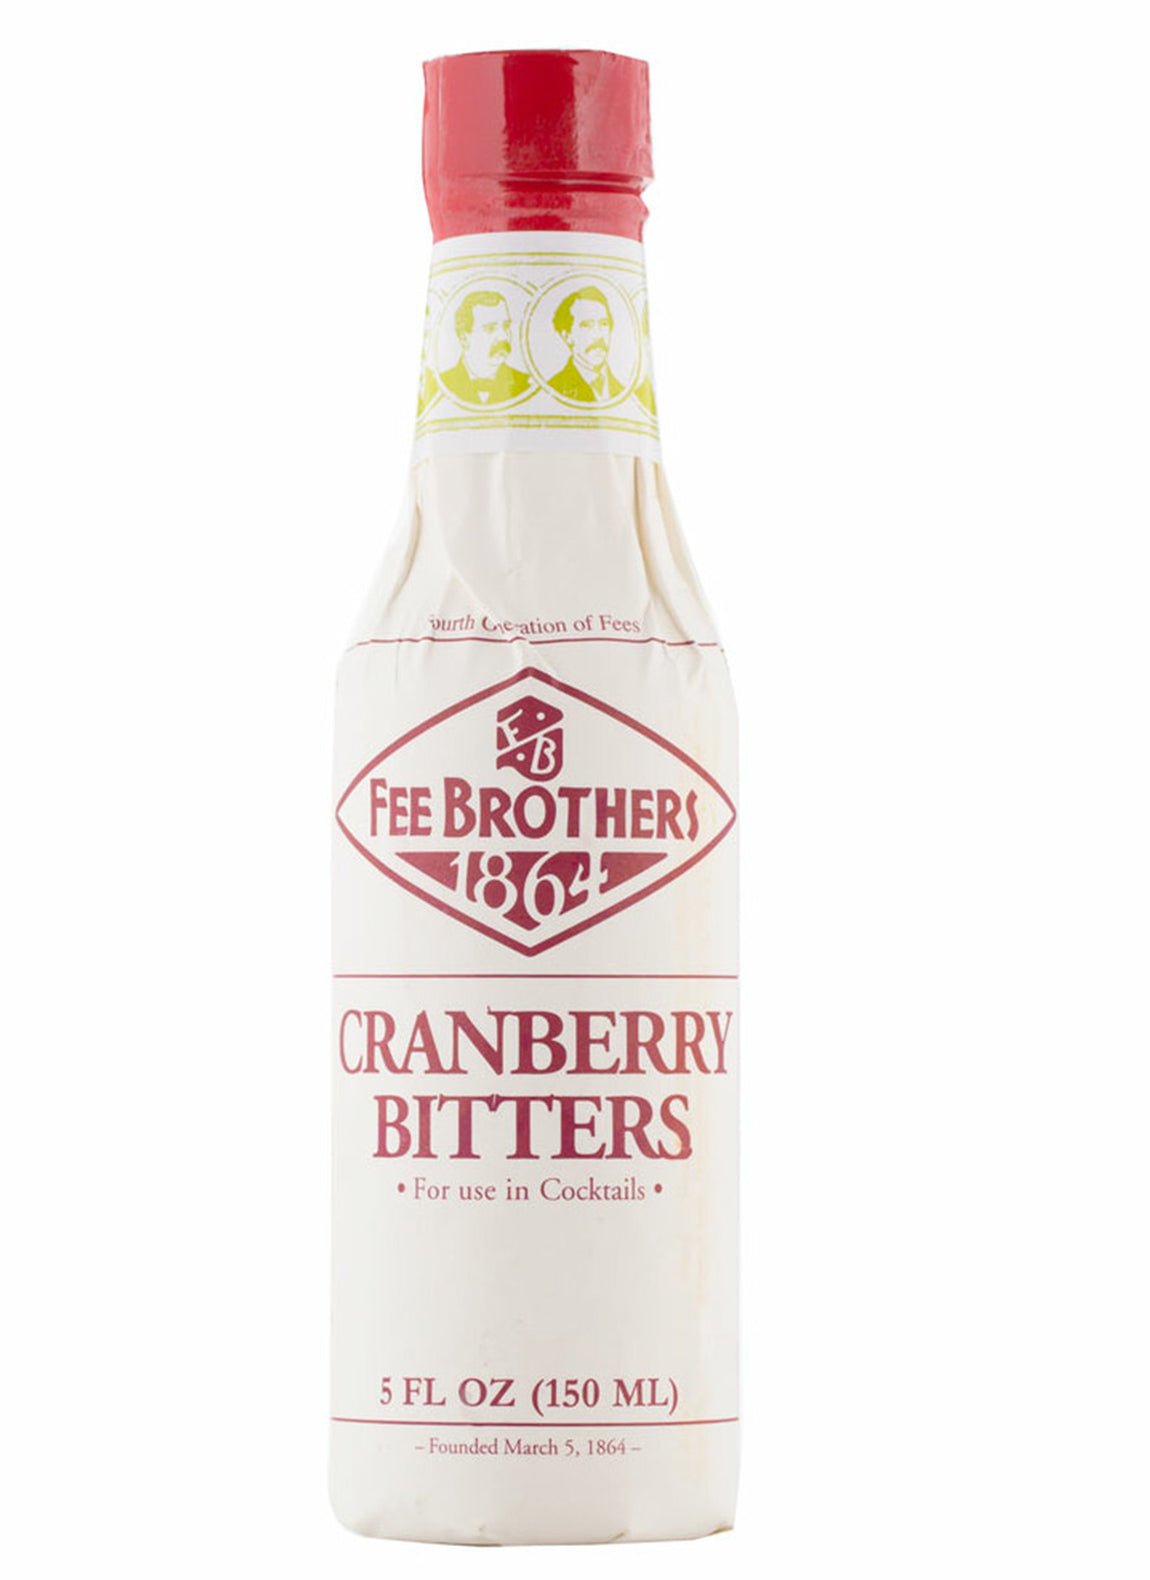 Fee brothers Cranberry Bitters - Bitters - Liquor Wine Cave